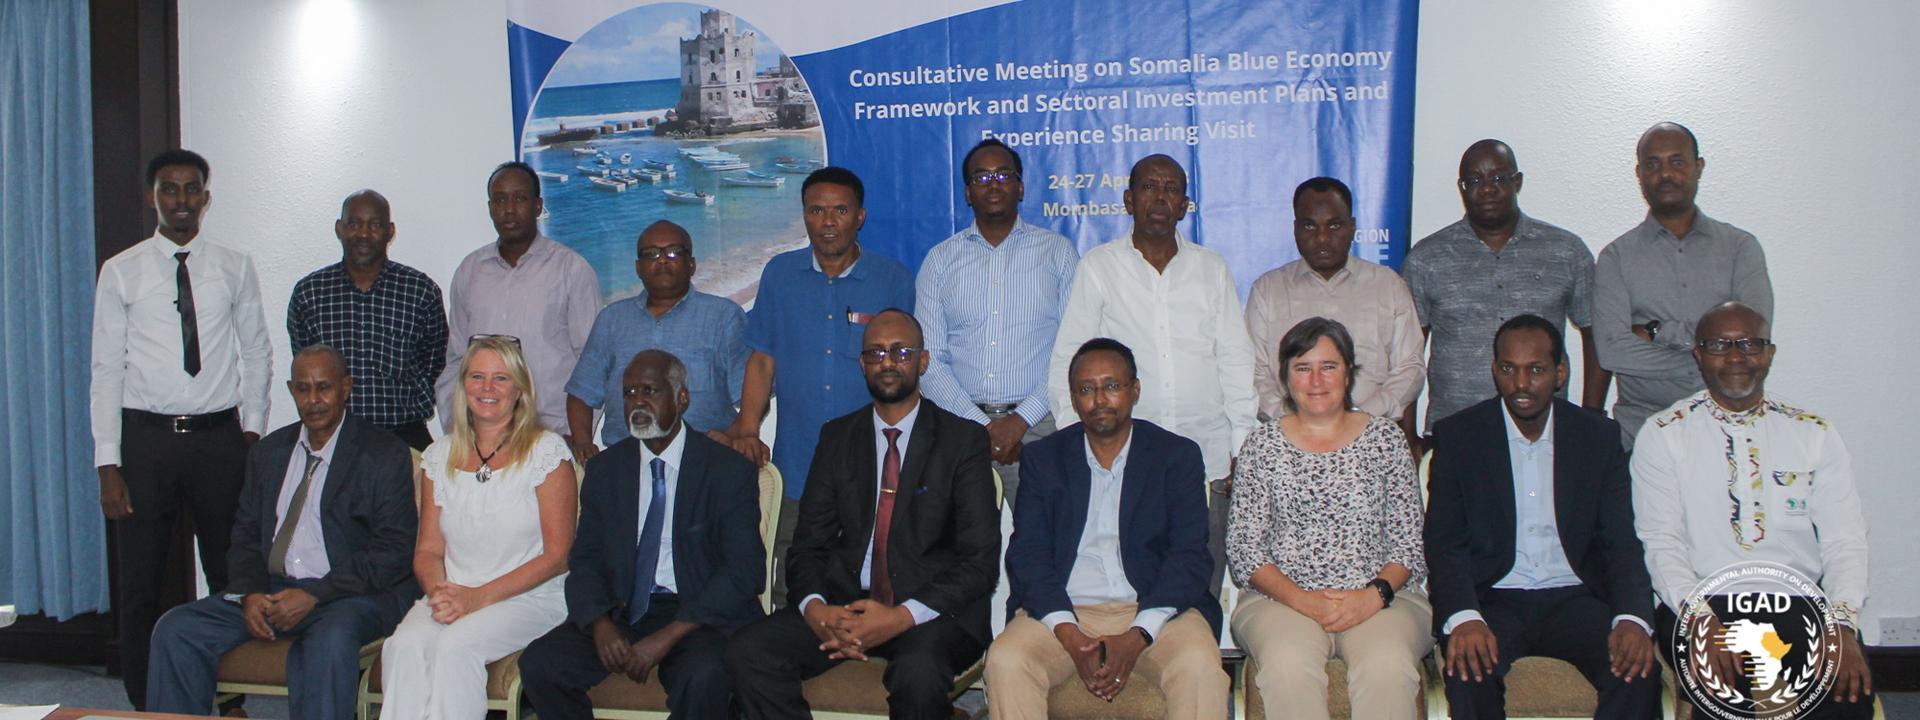 Consultative meeting on Somalia Blue Economy Framework and Sectoral Investment Plans Development